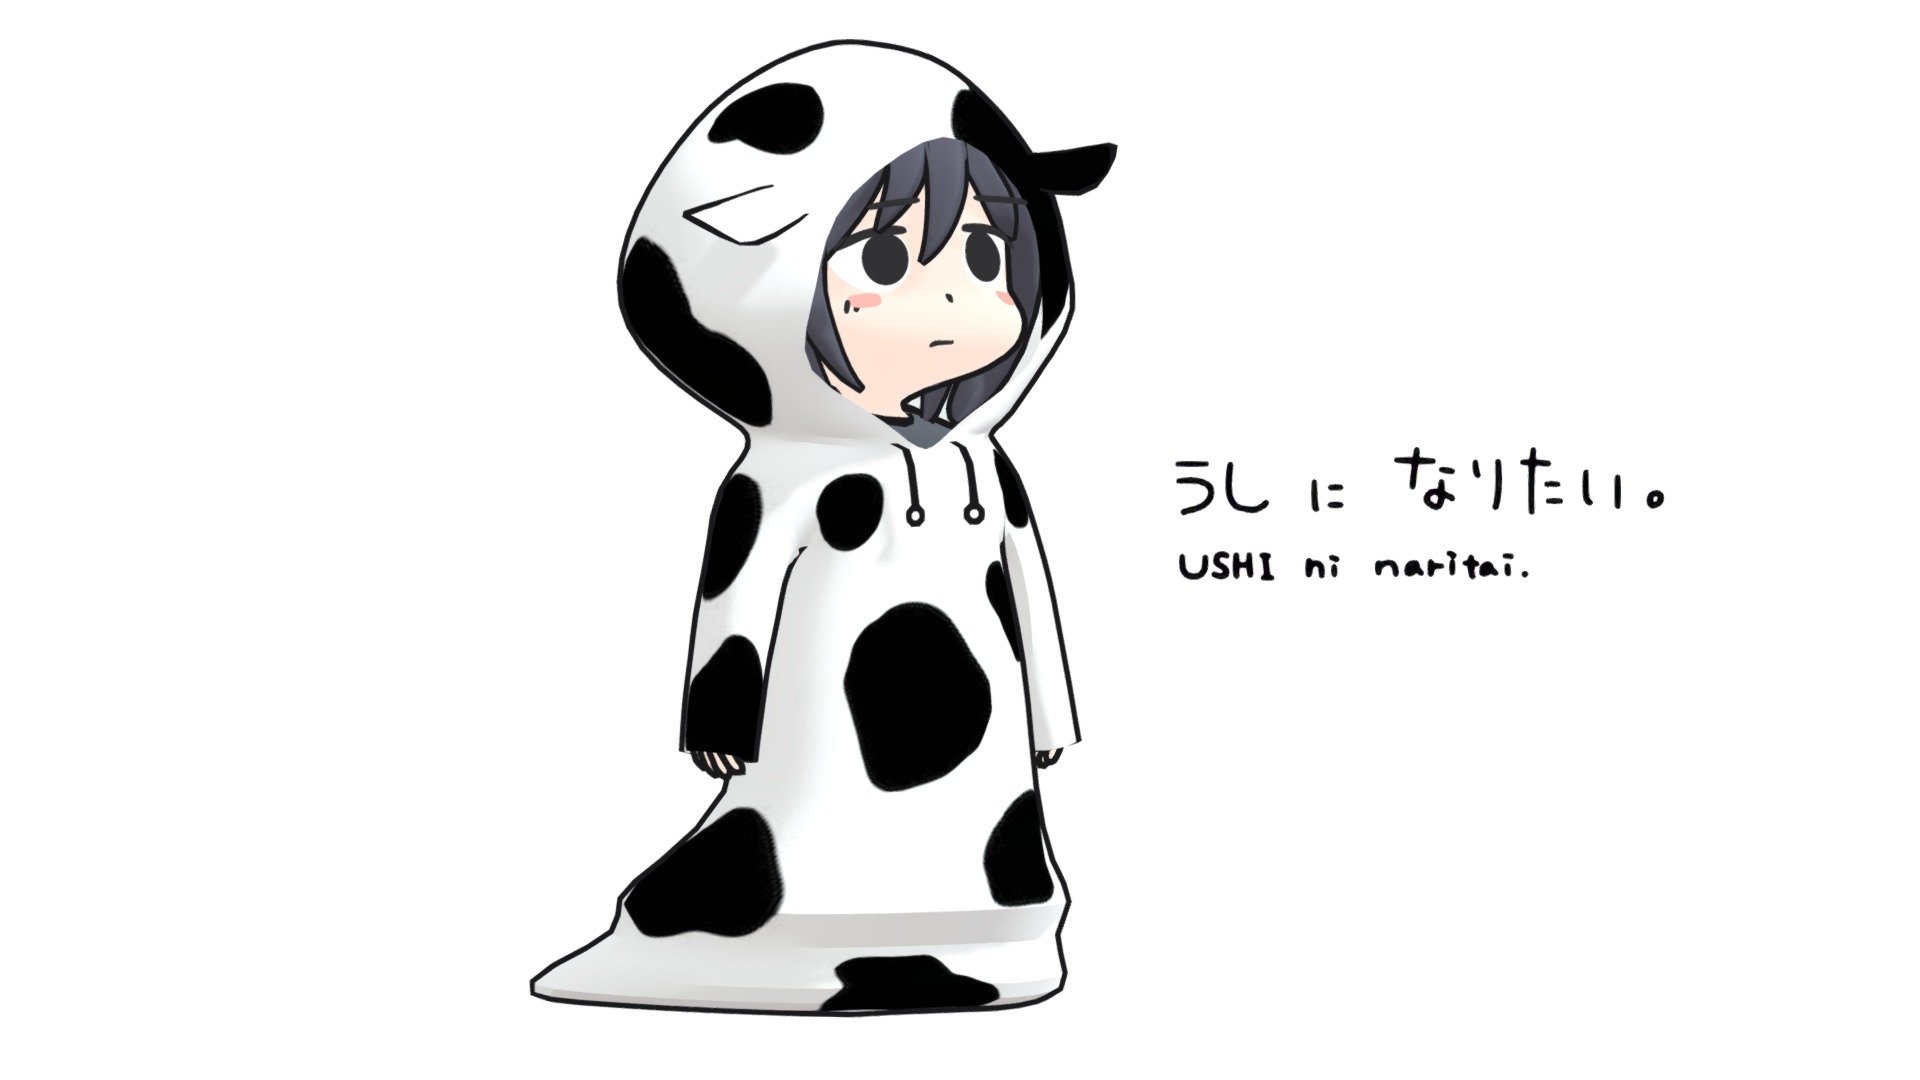 Chibi Cow. A really cool drawing I saw online. Had to test my skills and attempt to make a 3d model of it. Go check out more of Yomoi Nui artwork here!
https://yomoi.myportfolio.com/rakugaki - I want to be a cow! - 3D model by wilemben 3d model